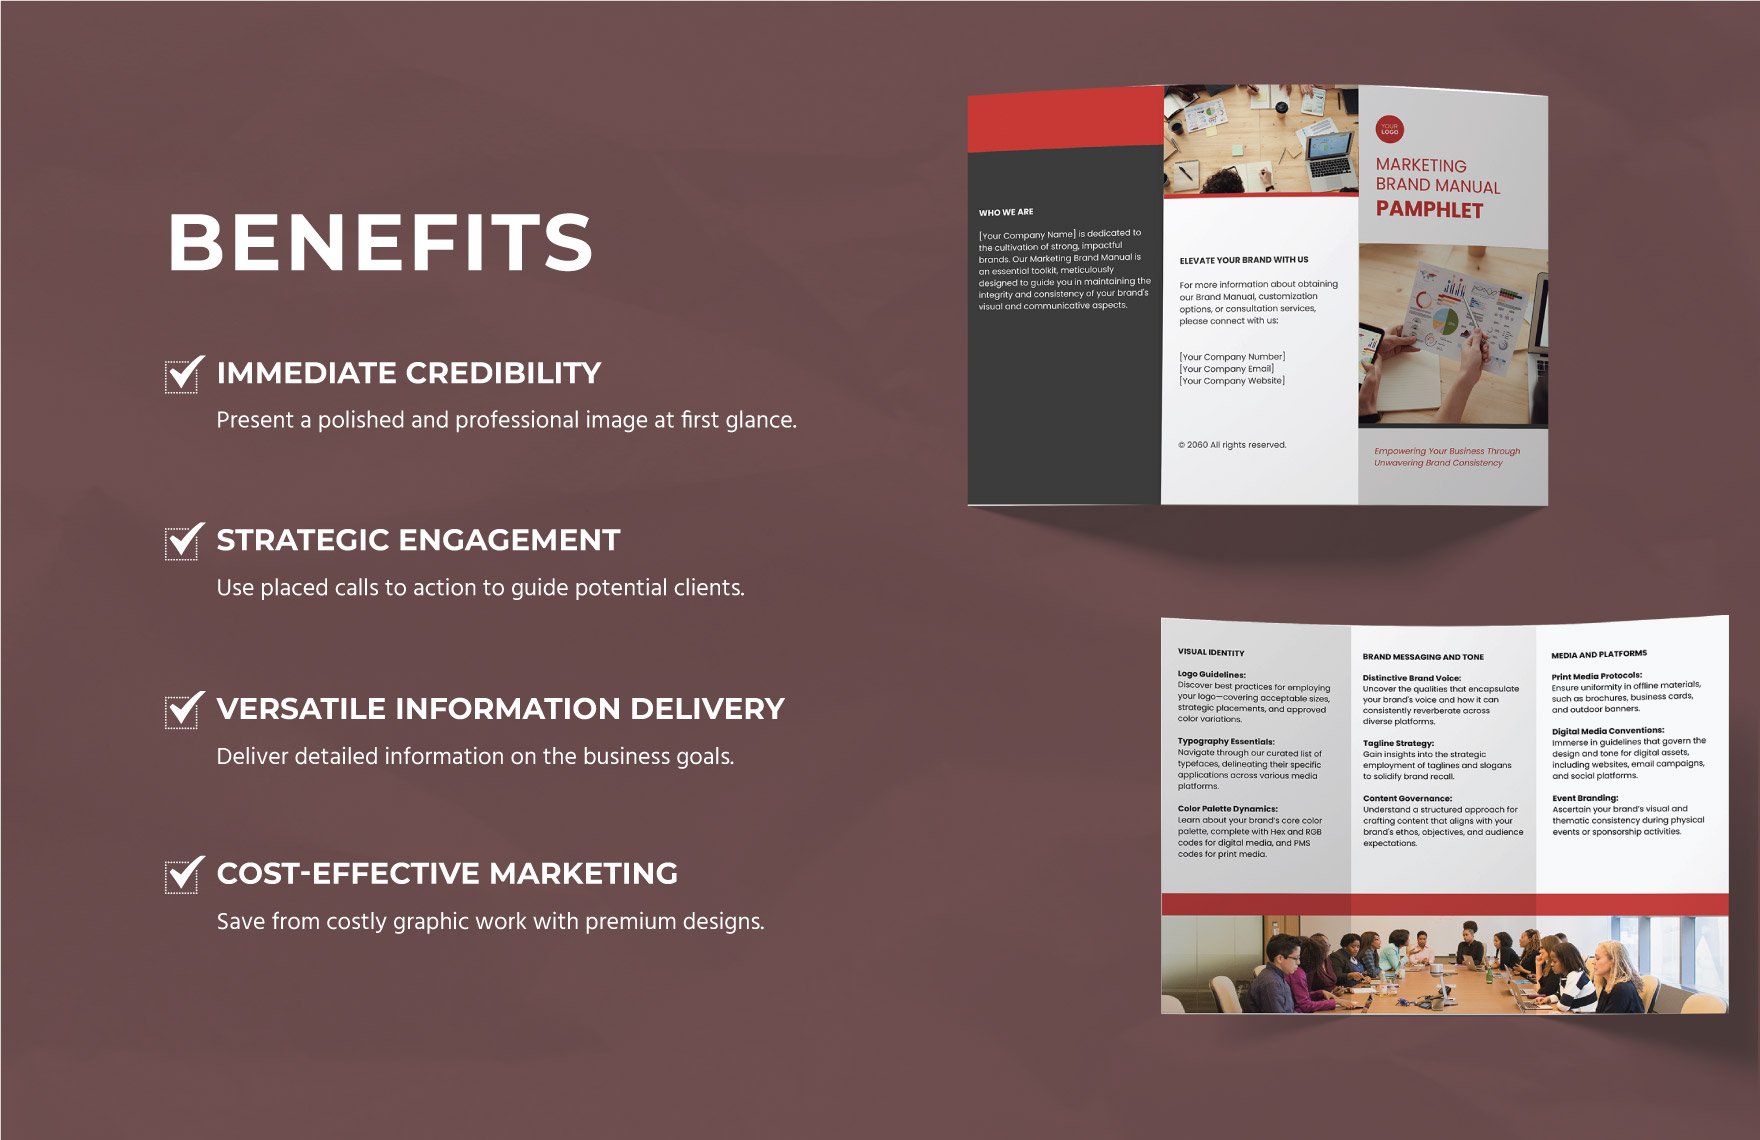 Marketing Brand Manual Pamphlet Template